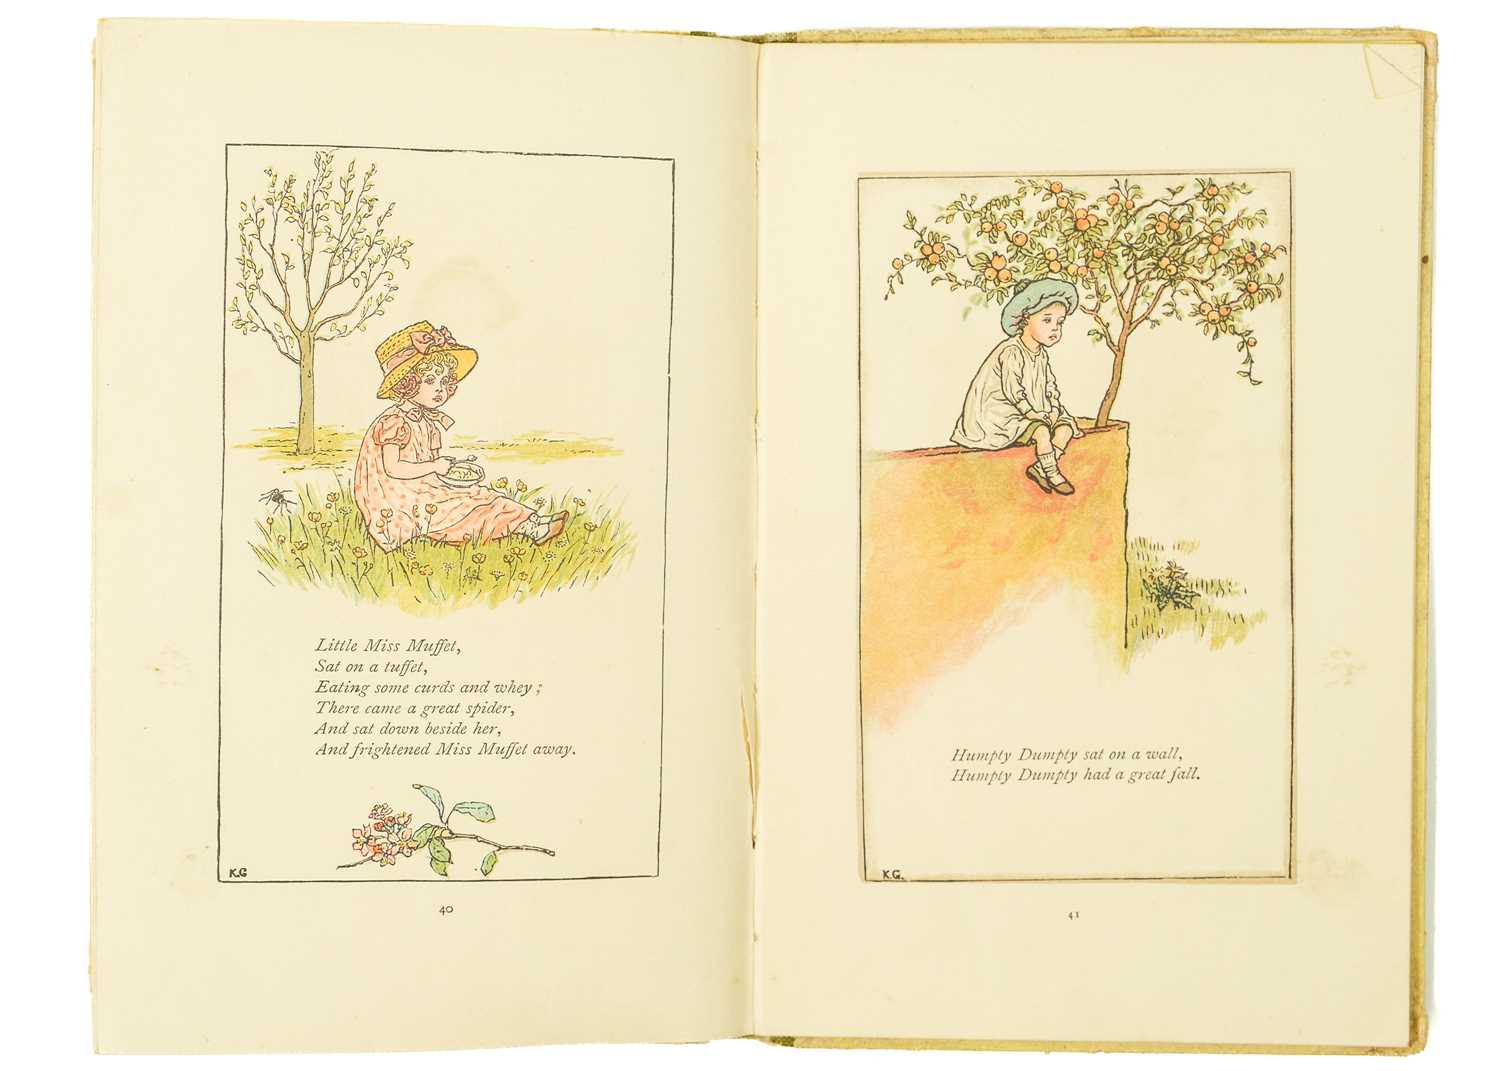 Kate Greenaway Illustrations 'Mother Goose or The Old Nursery Rhymes' - Image 6 of 6